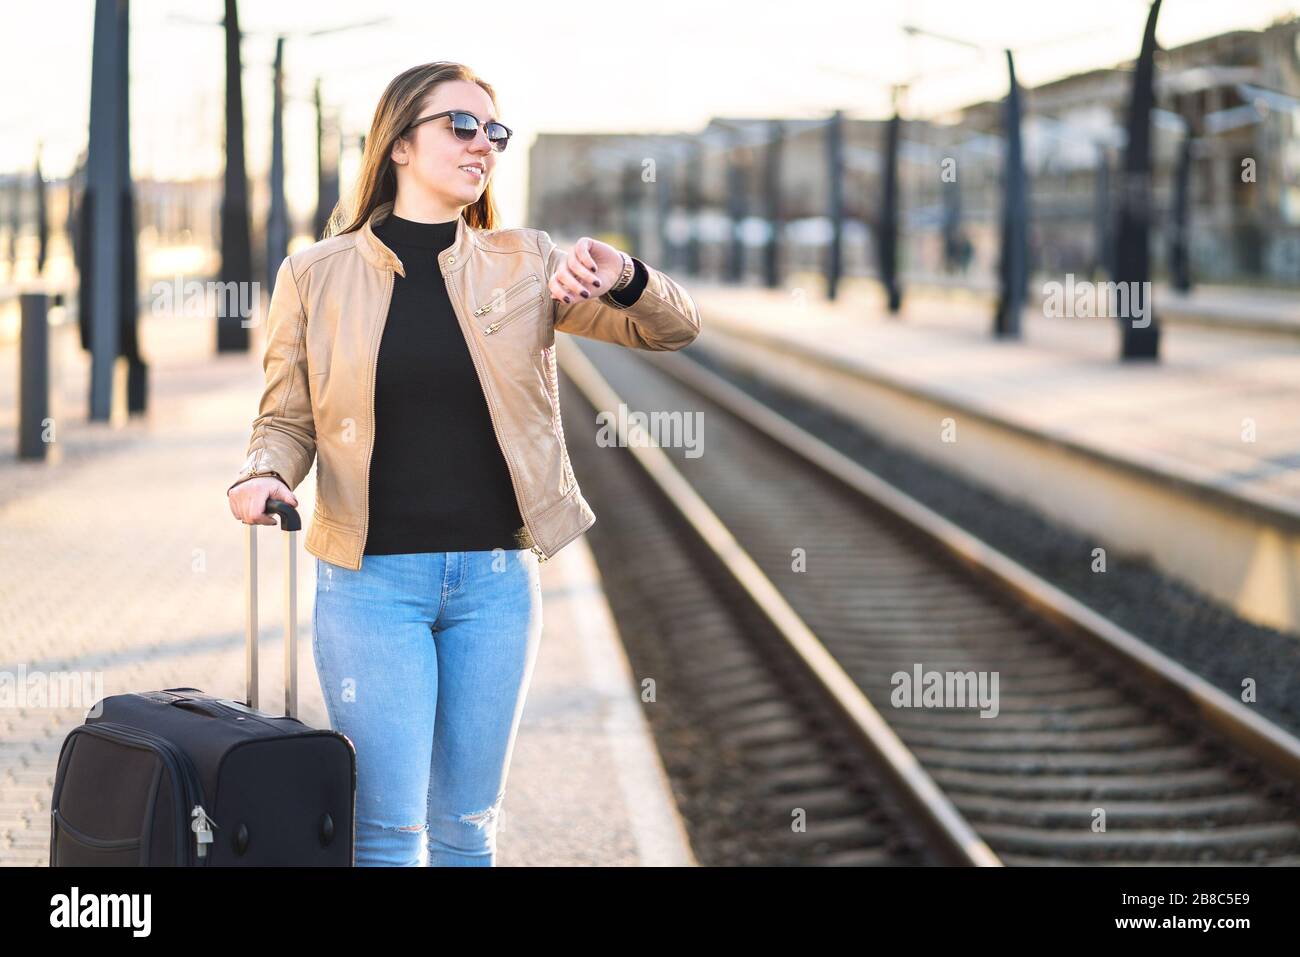 Woman looking at the time and watch while waiting for train. Smiling and happy female traveler standing at station and platform. Stock Photo